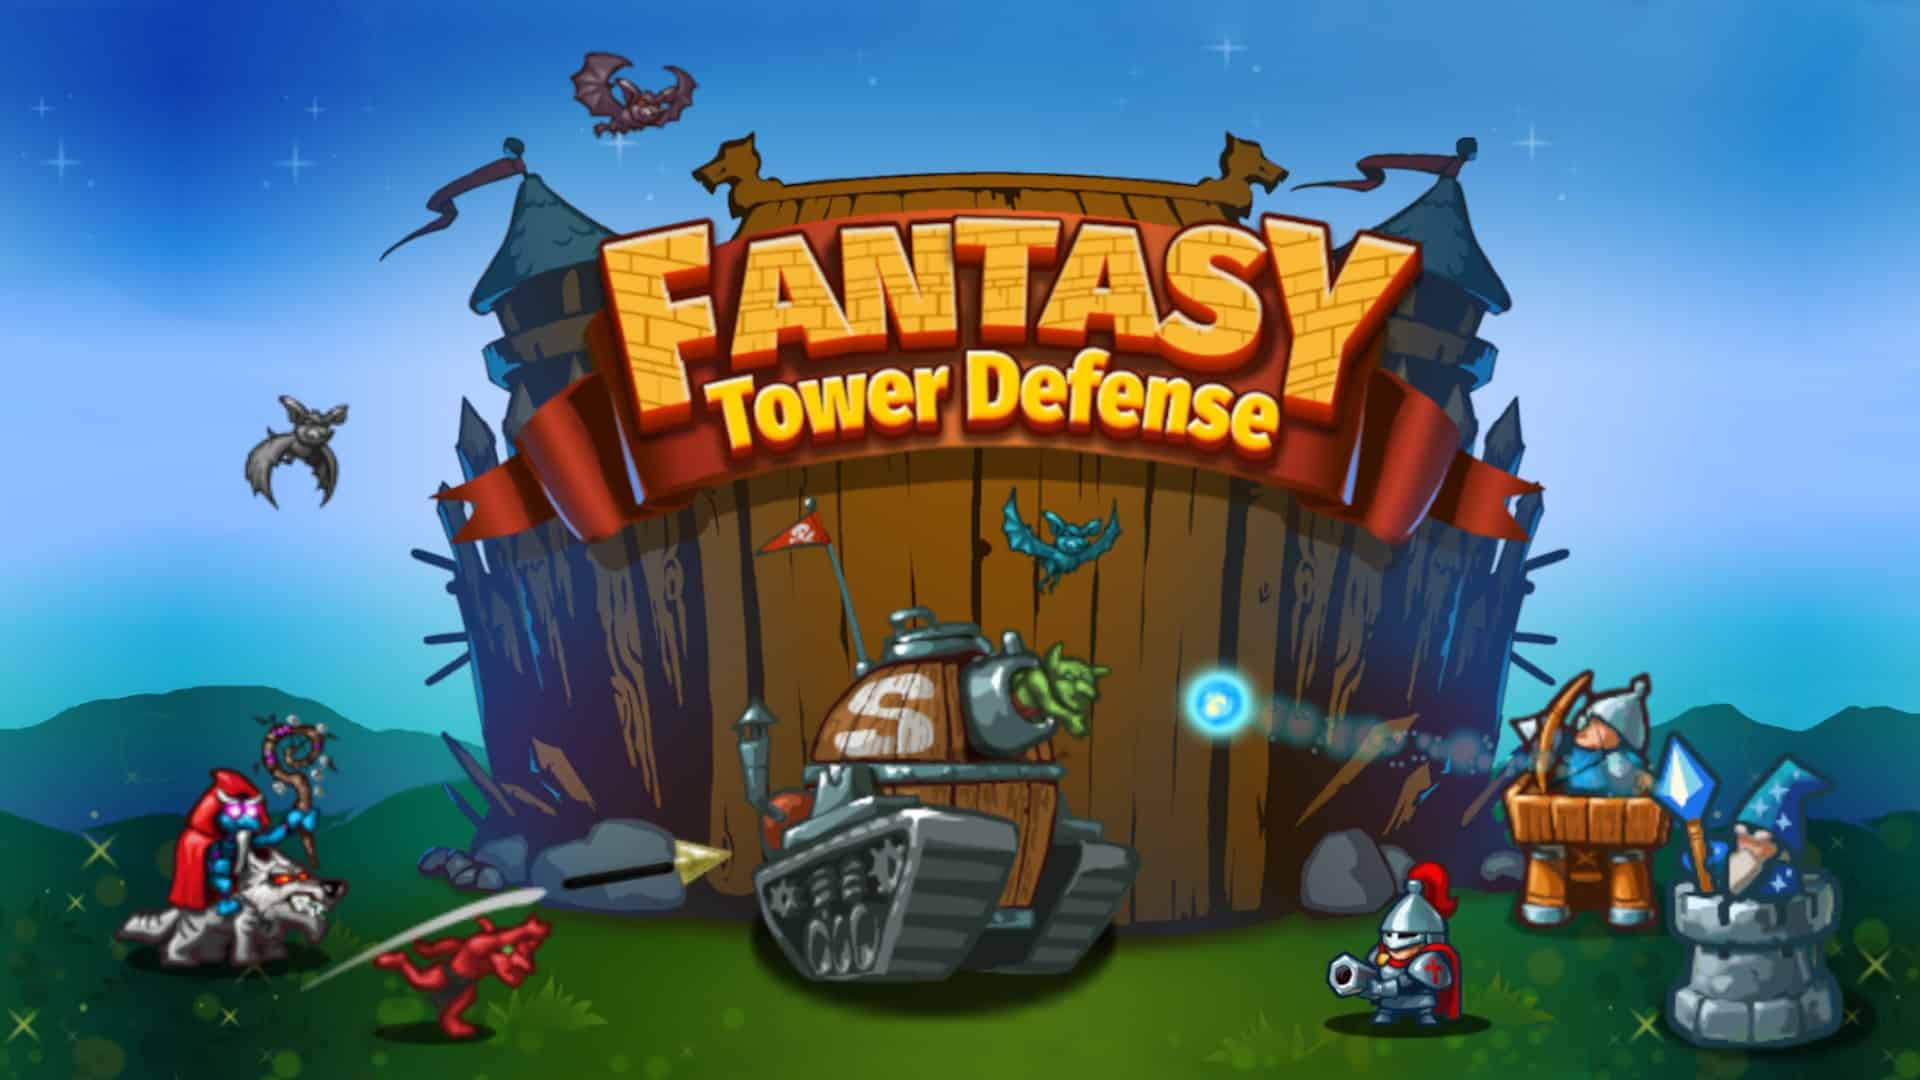 Fantasy Tower Defense player count stats